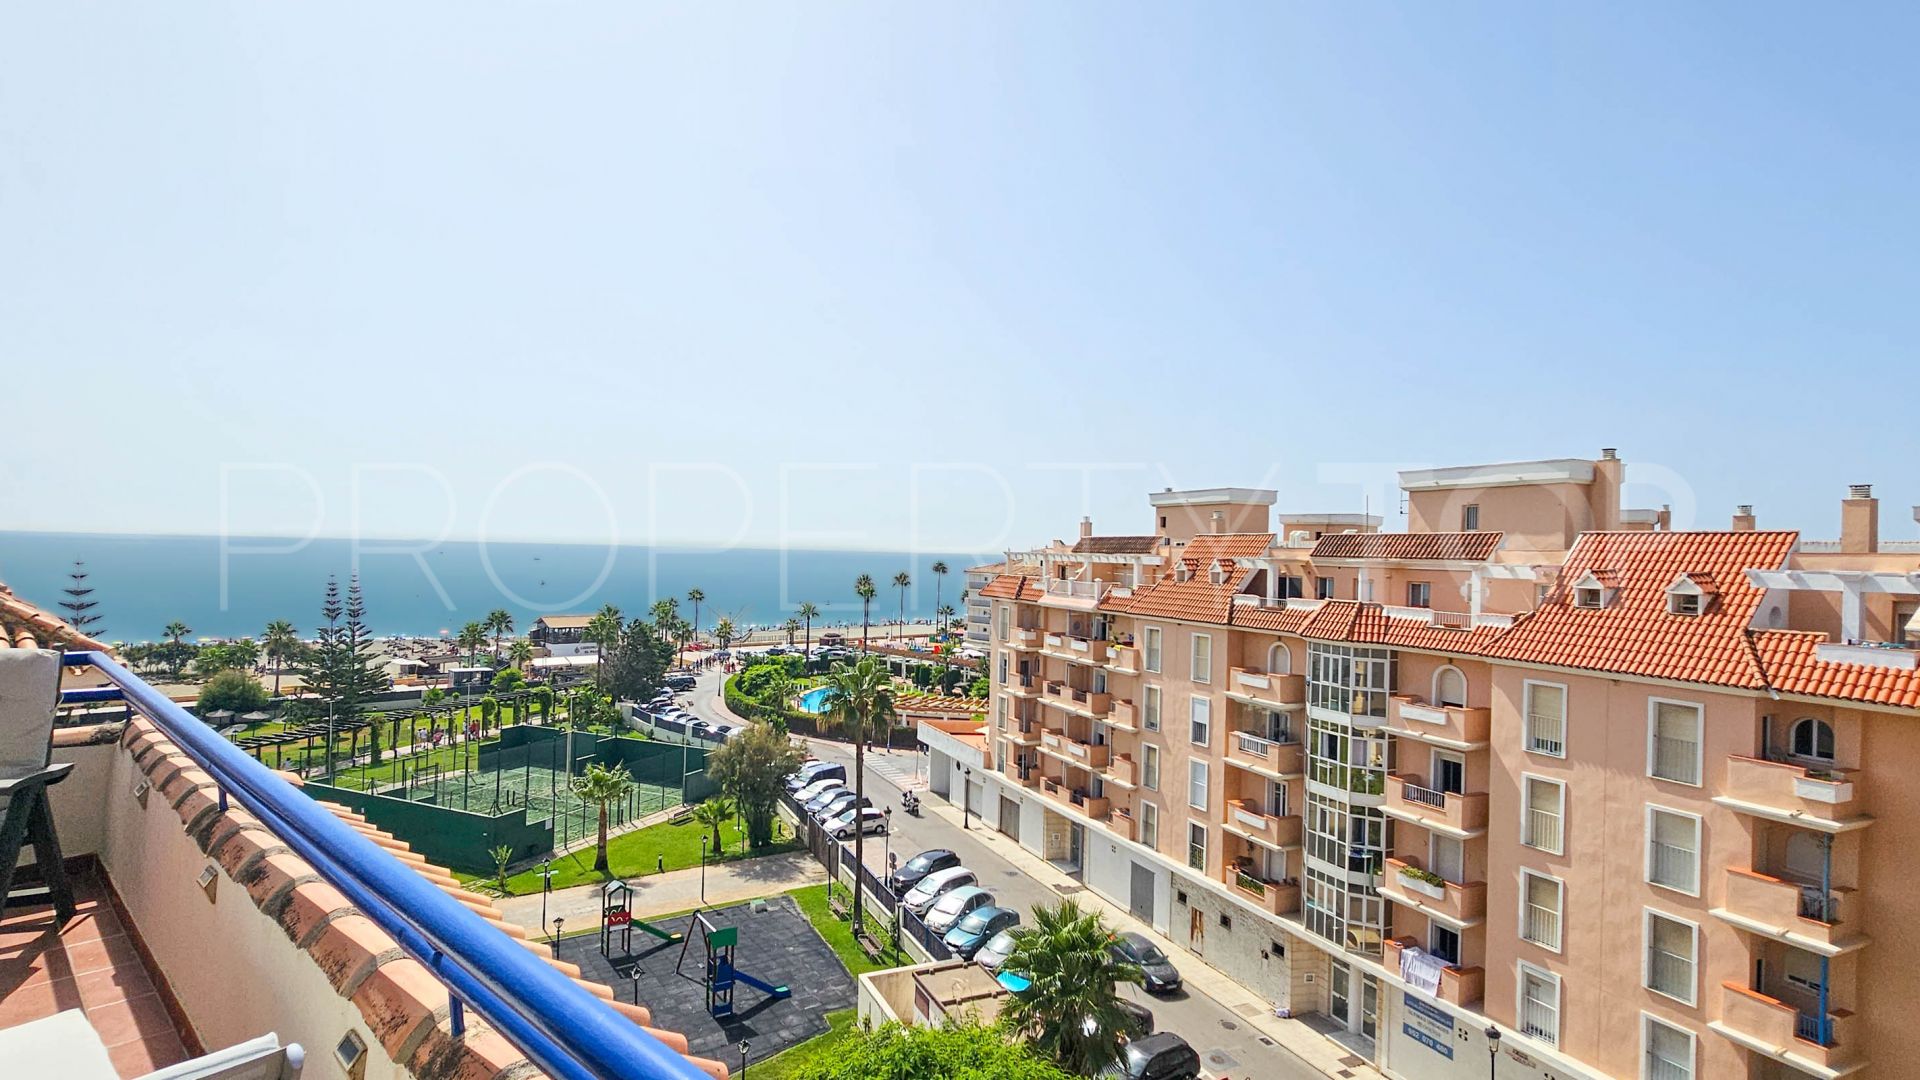 Penthouse for sale in Sabinillas with 1 bedroom